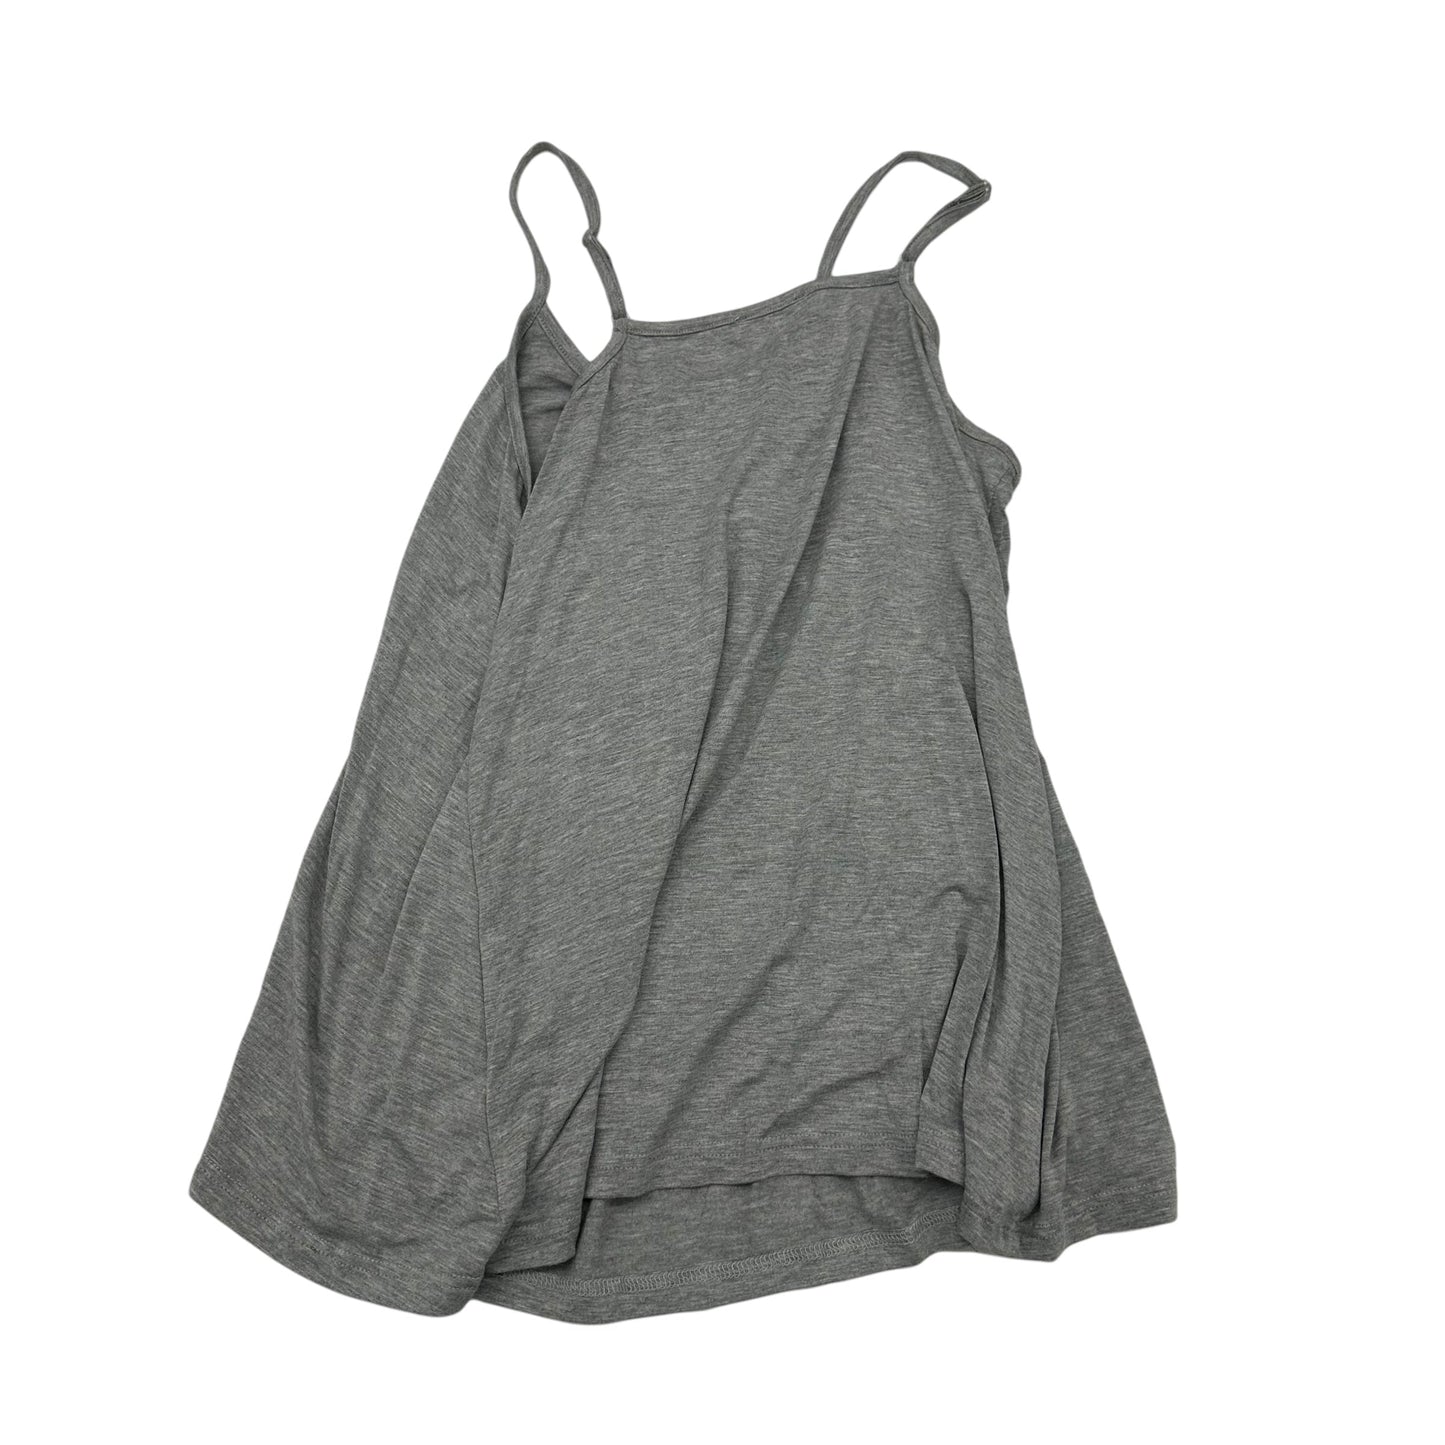 Nursing Top Sleeveless By Clothes Mentor  Size: L